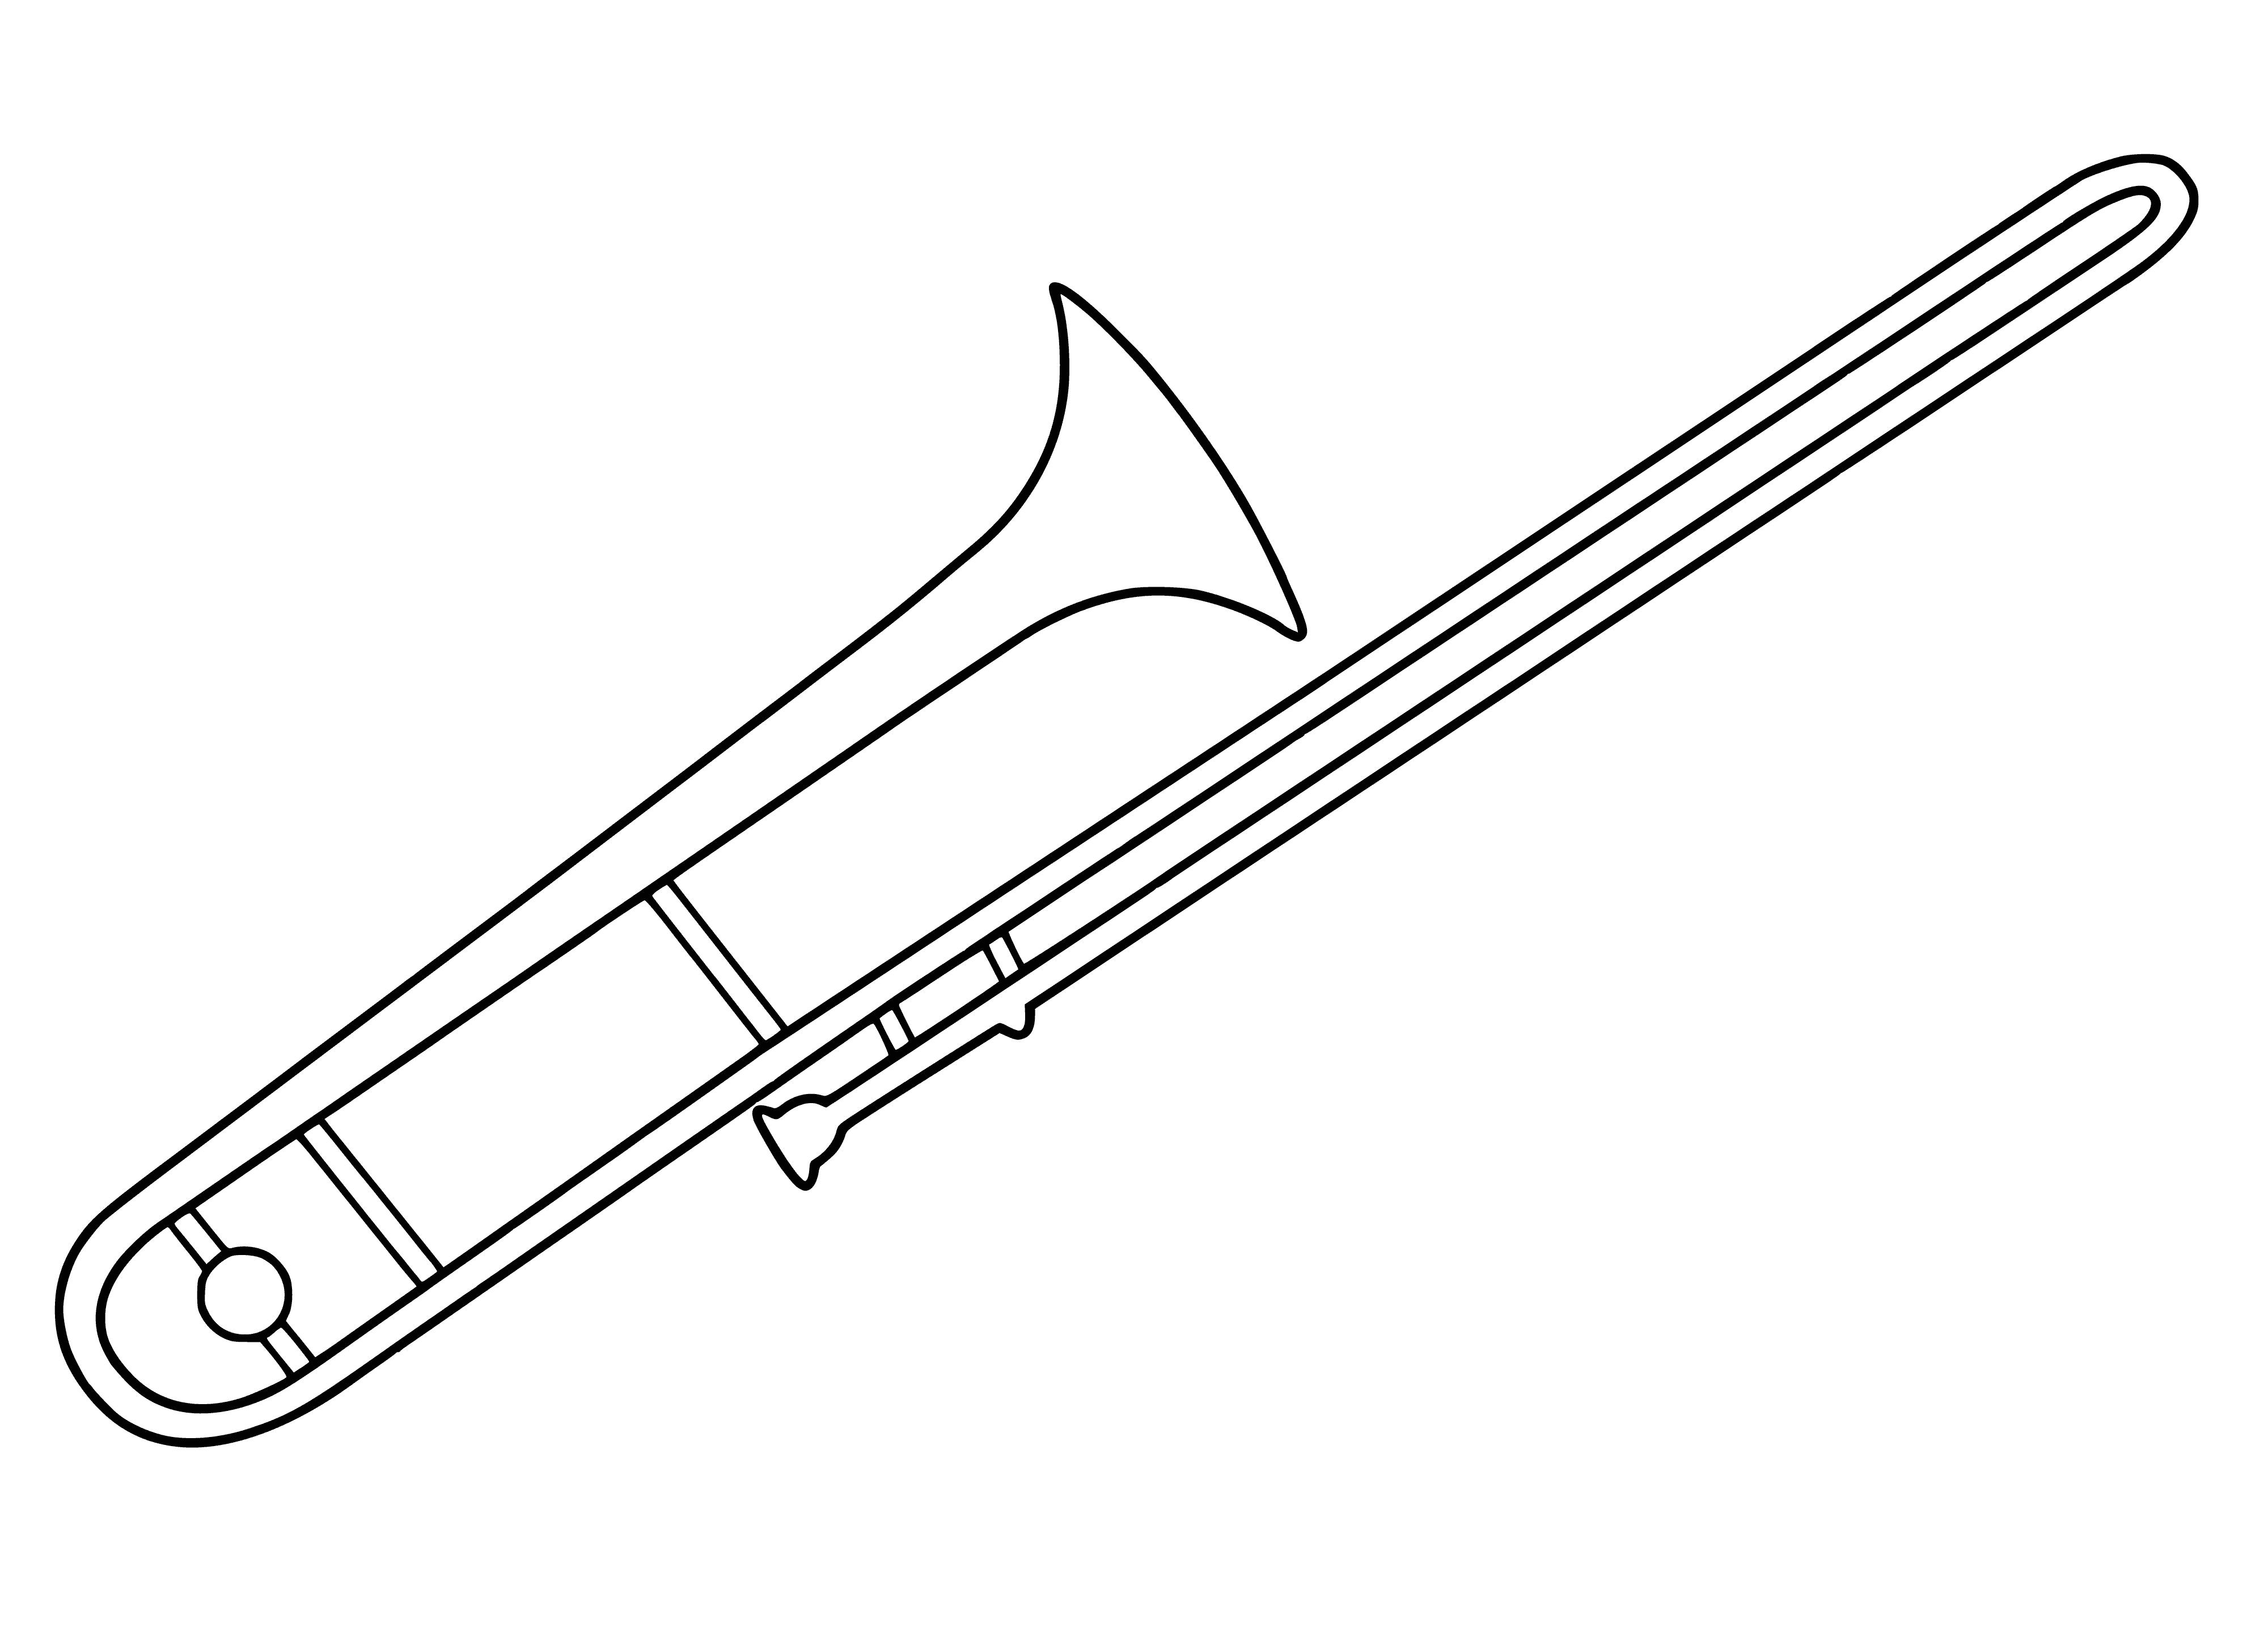 coloring page: A trombone is a brass instrument with a slide to change pitch; it's bigger than a trumpet & has a lower pitch.